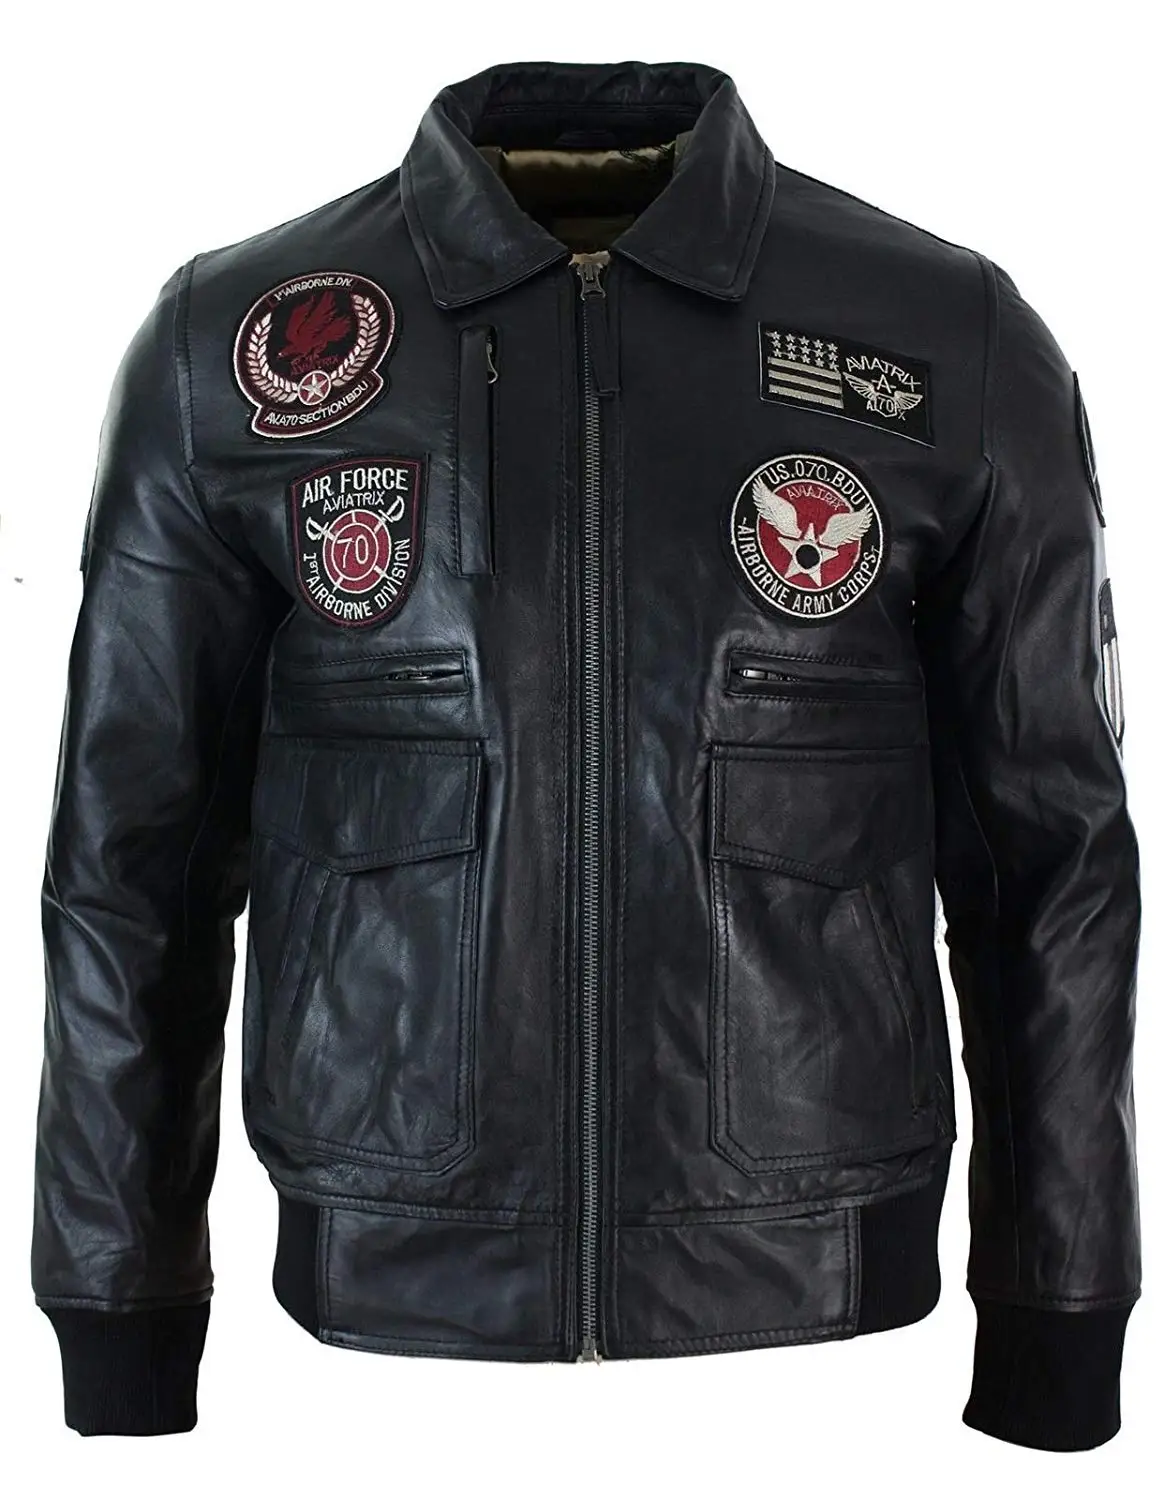 Cheap Leather Jacket Air Force, find Leather Jacket Air Force deals on ...